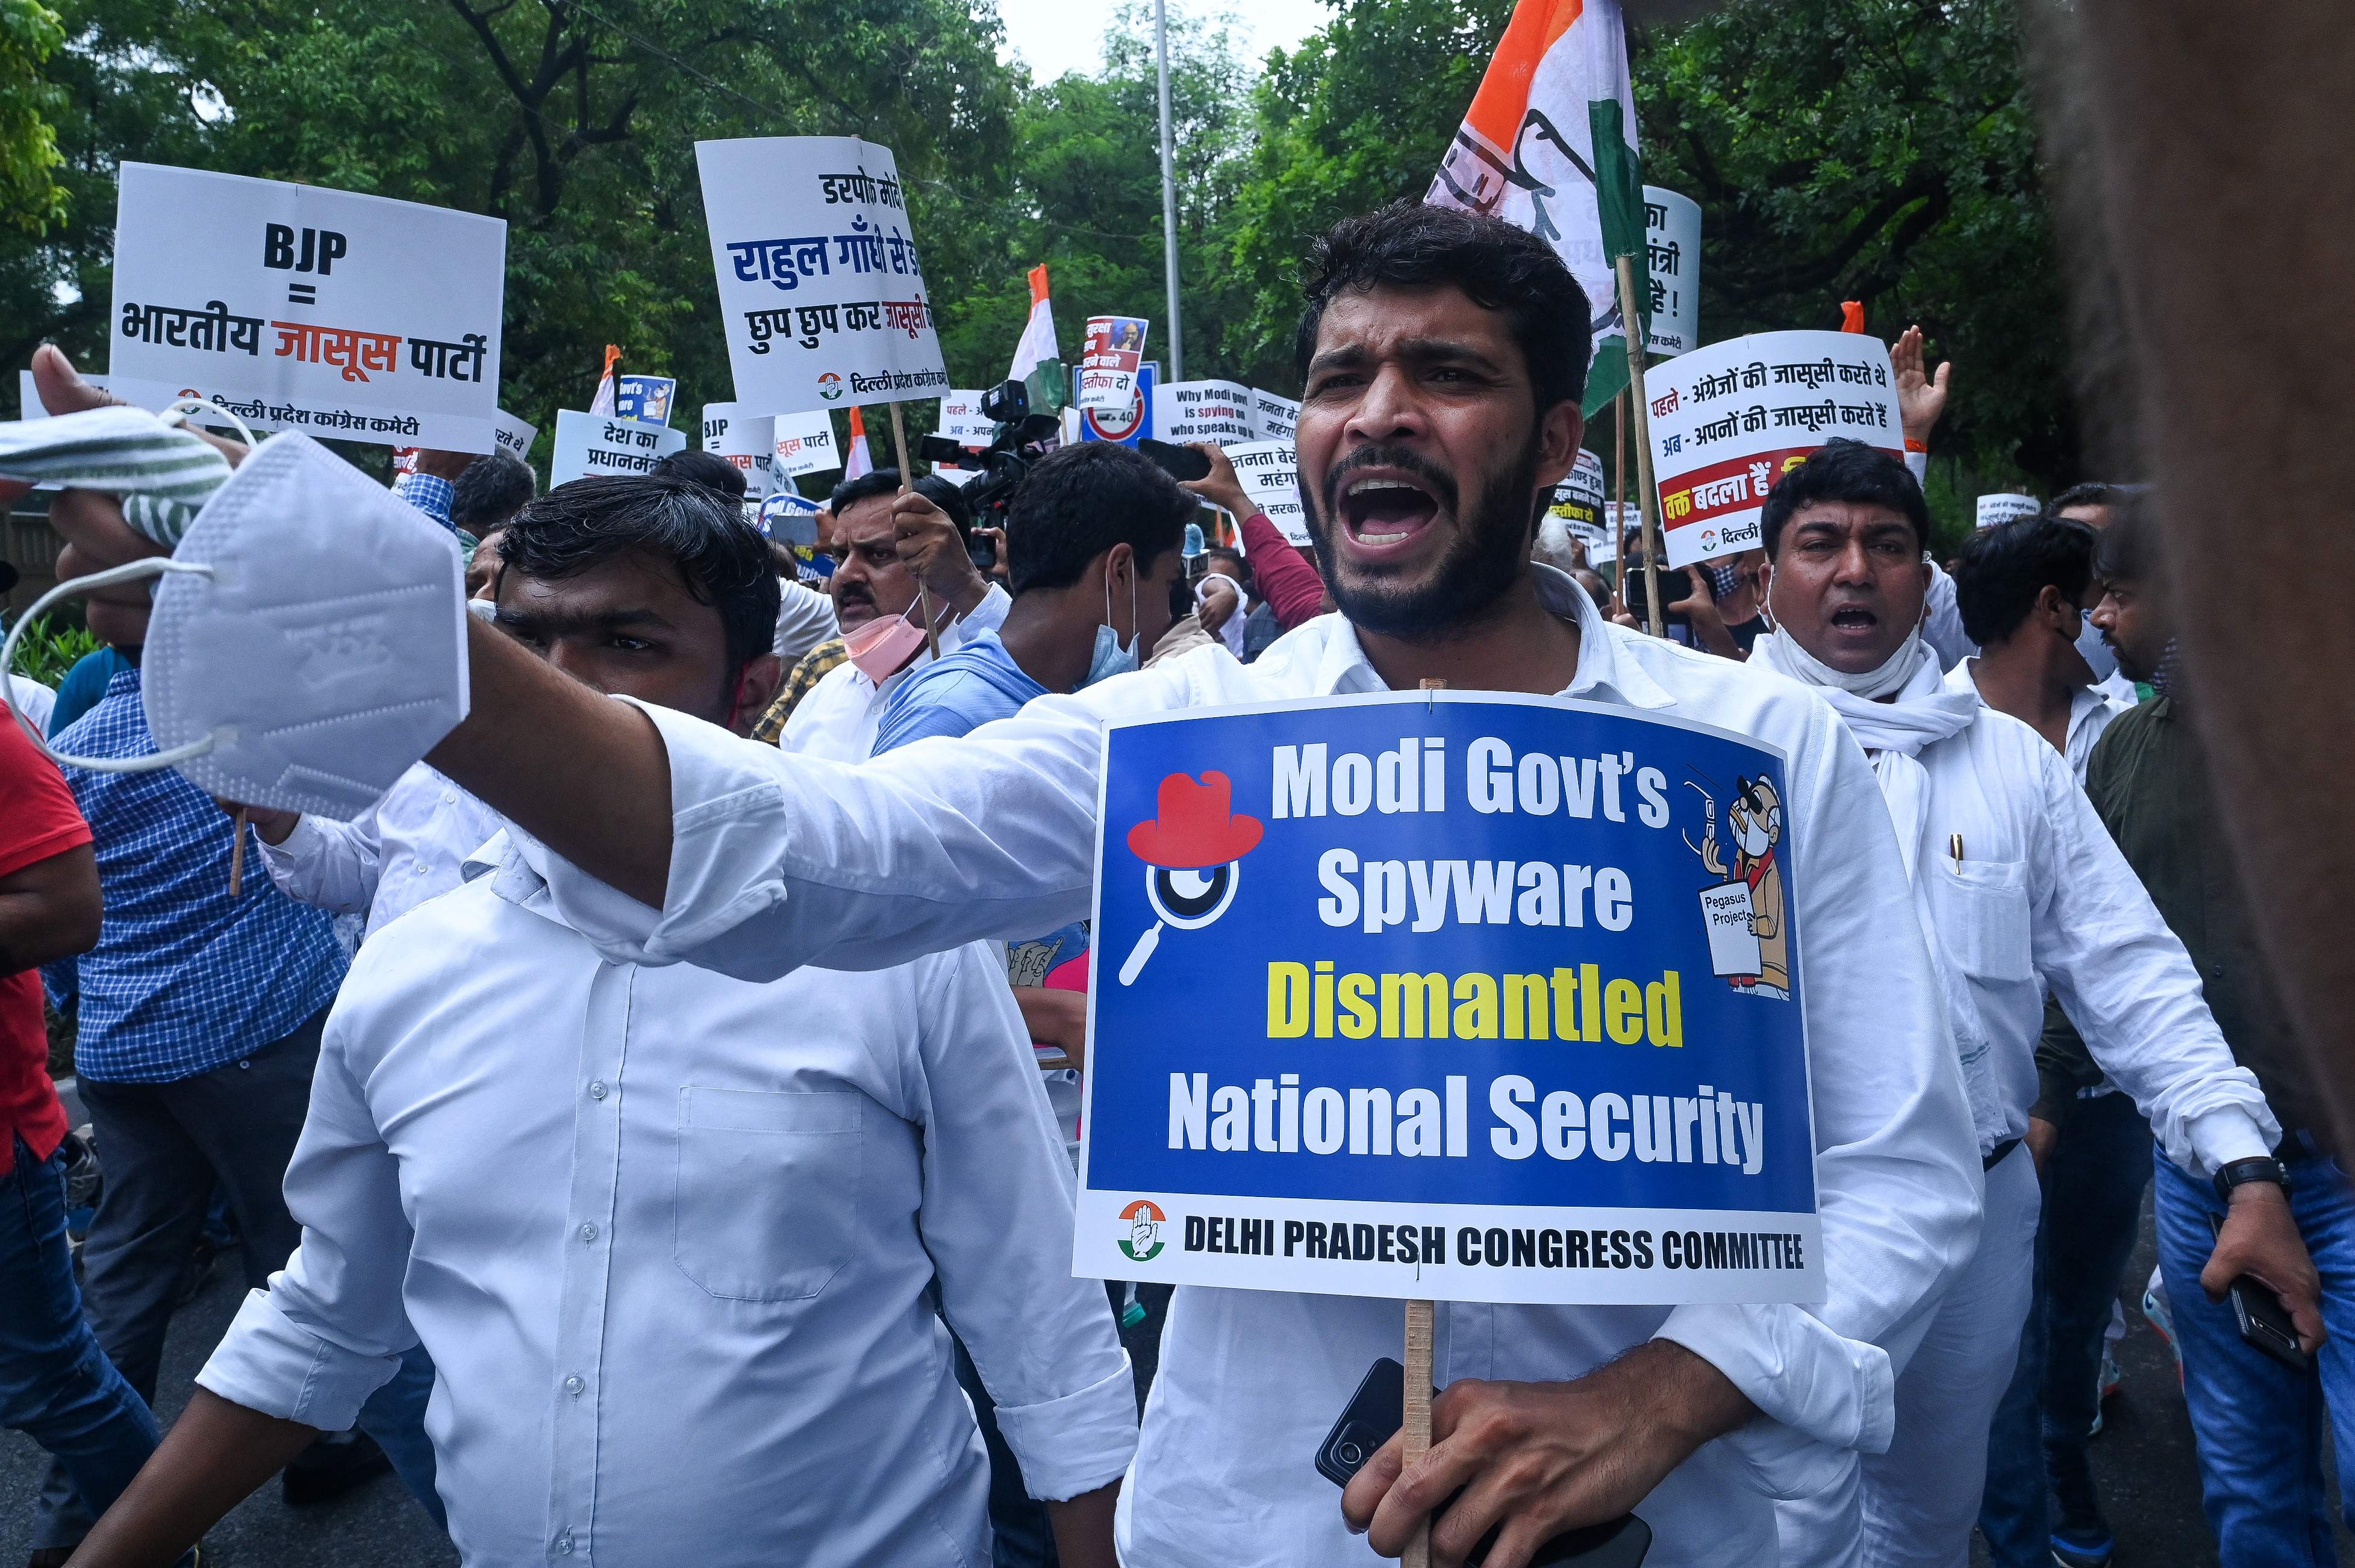 Protesters in India demonstrate against the Modi government’s alleged involvement in surveillance operations using the Pegasus spyware